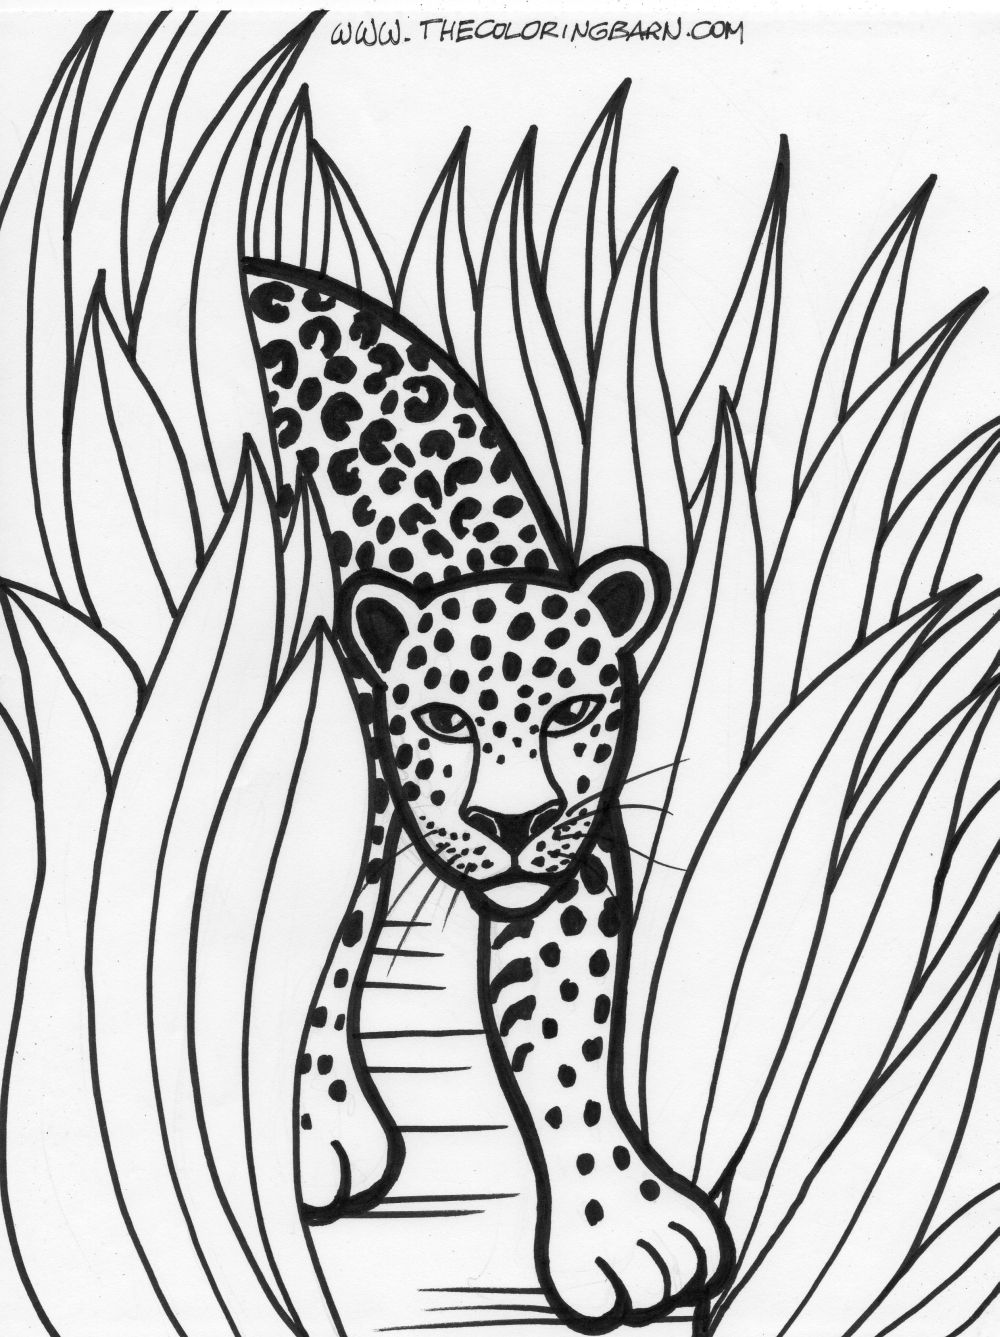 Rainforest Coloring Pages - The Coloring Barn